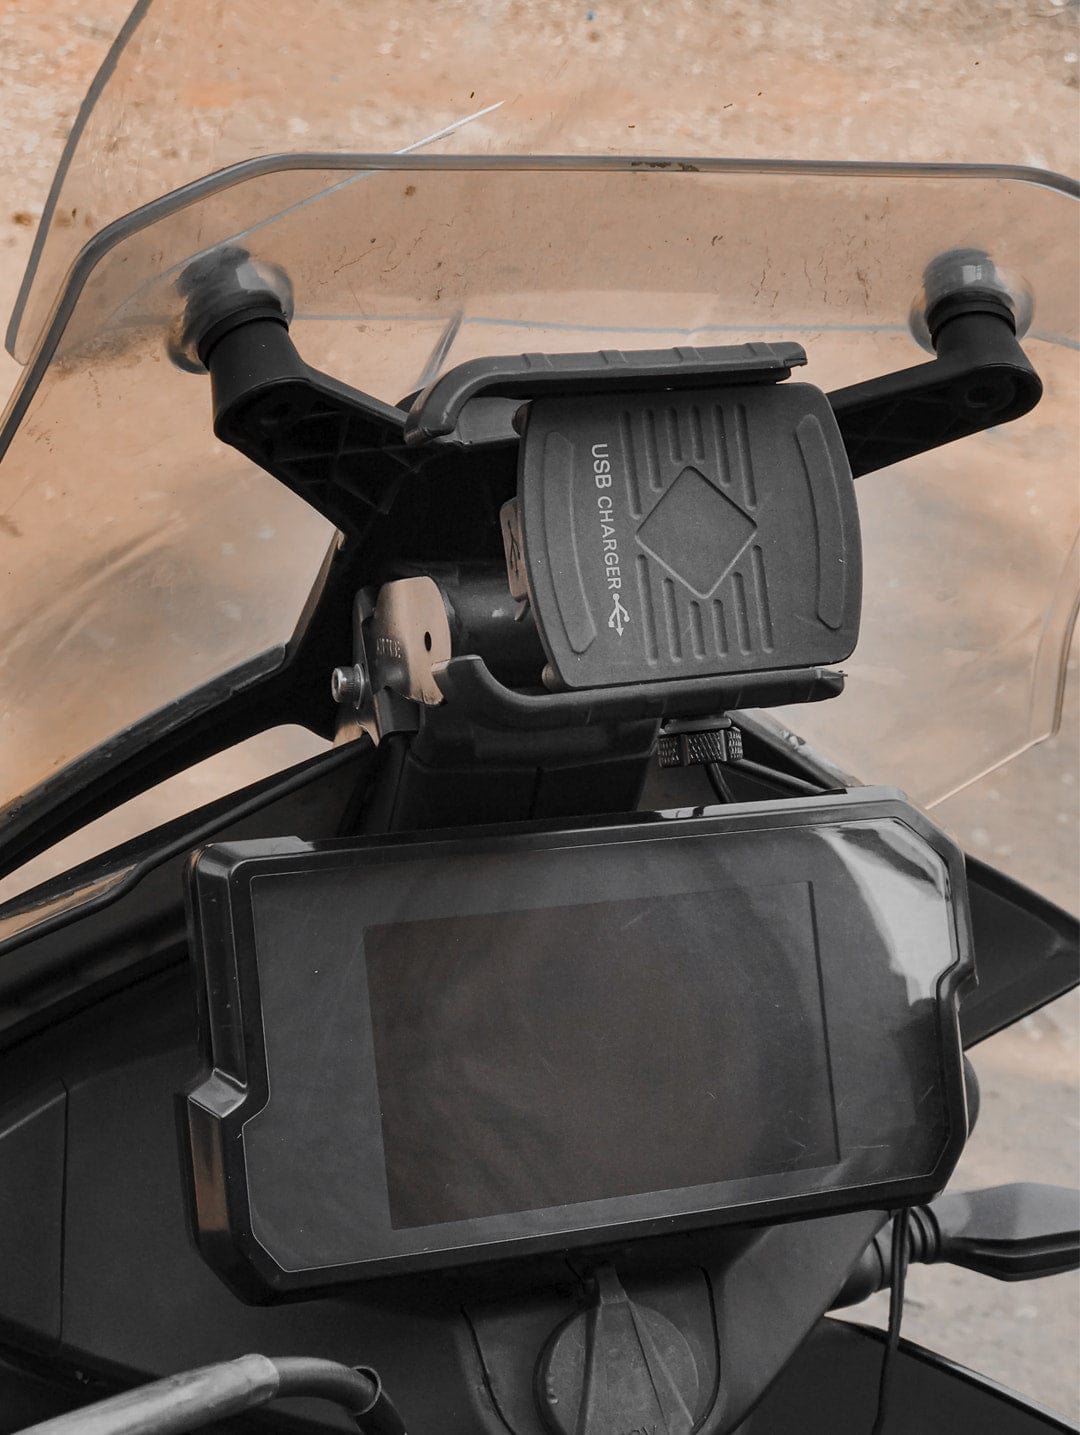 The Standard Combo Kit of 6 Accessories for KTM 250 Adventure